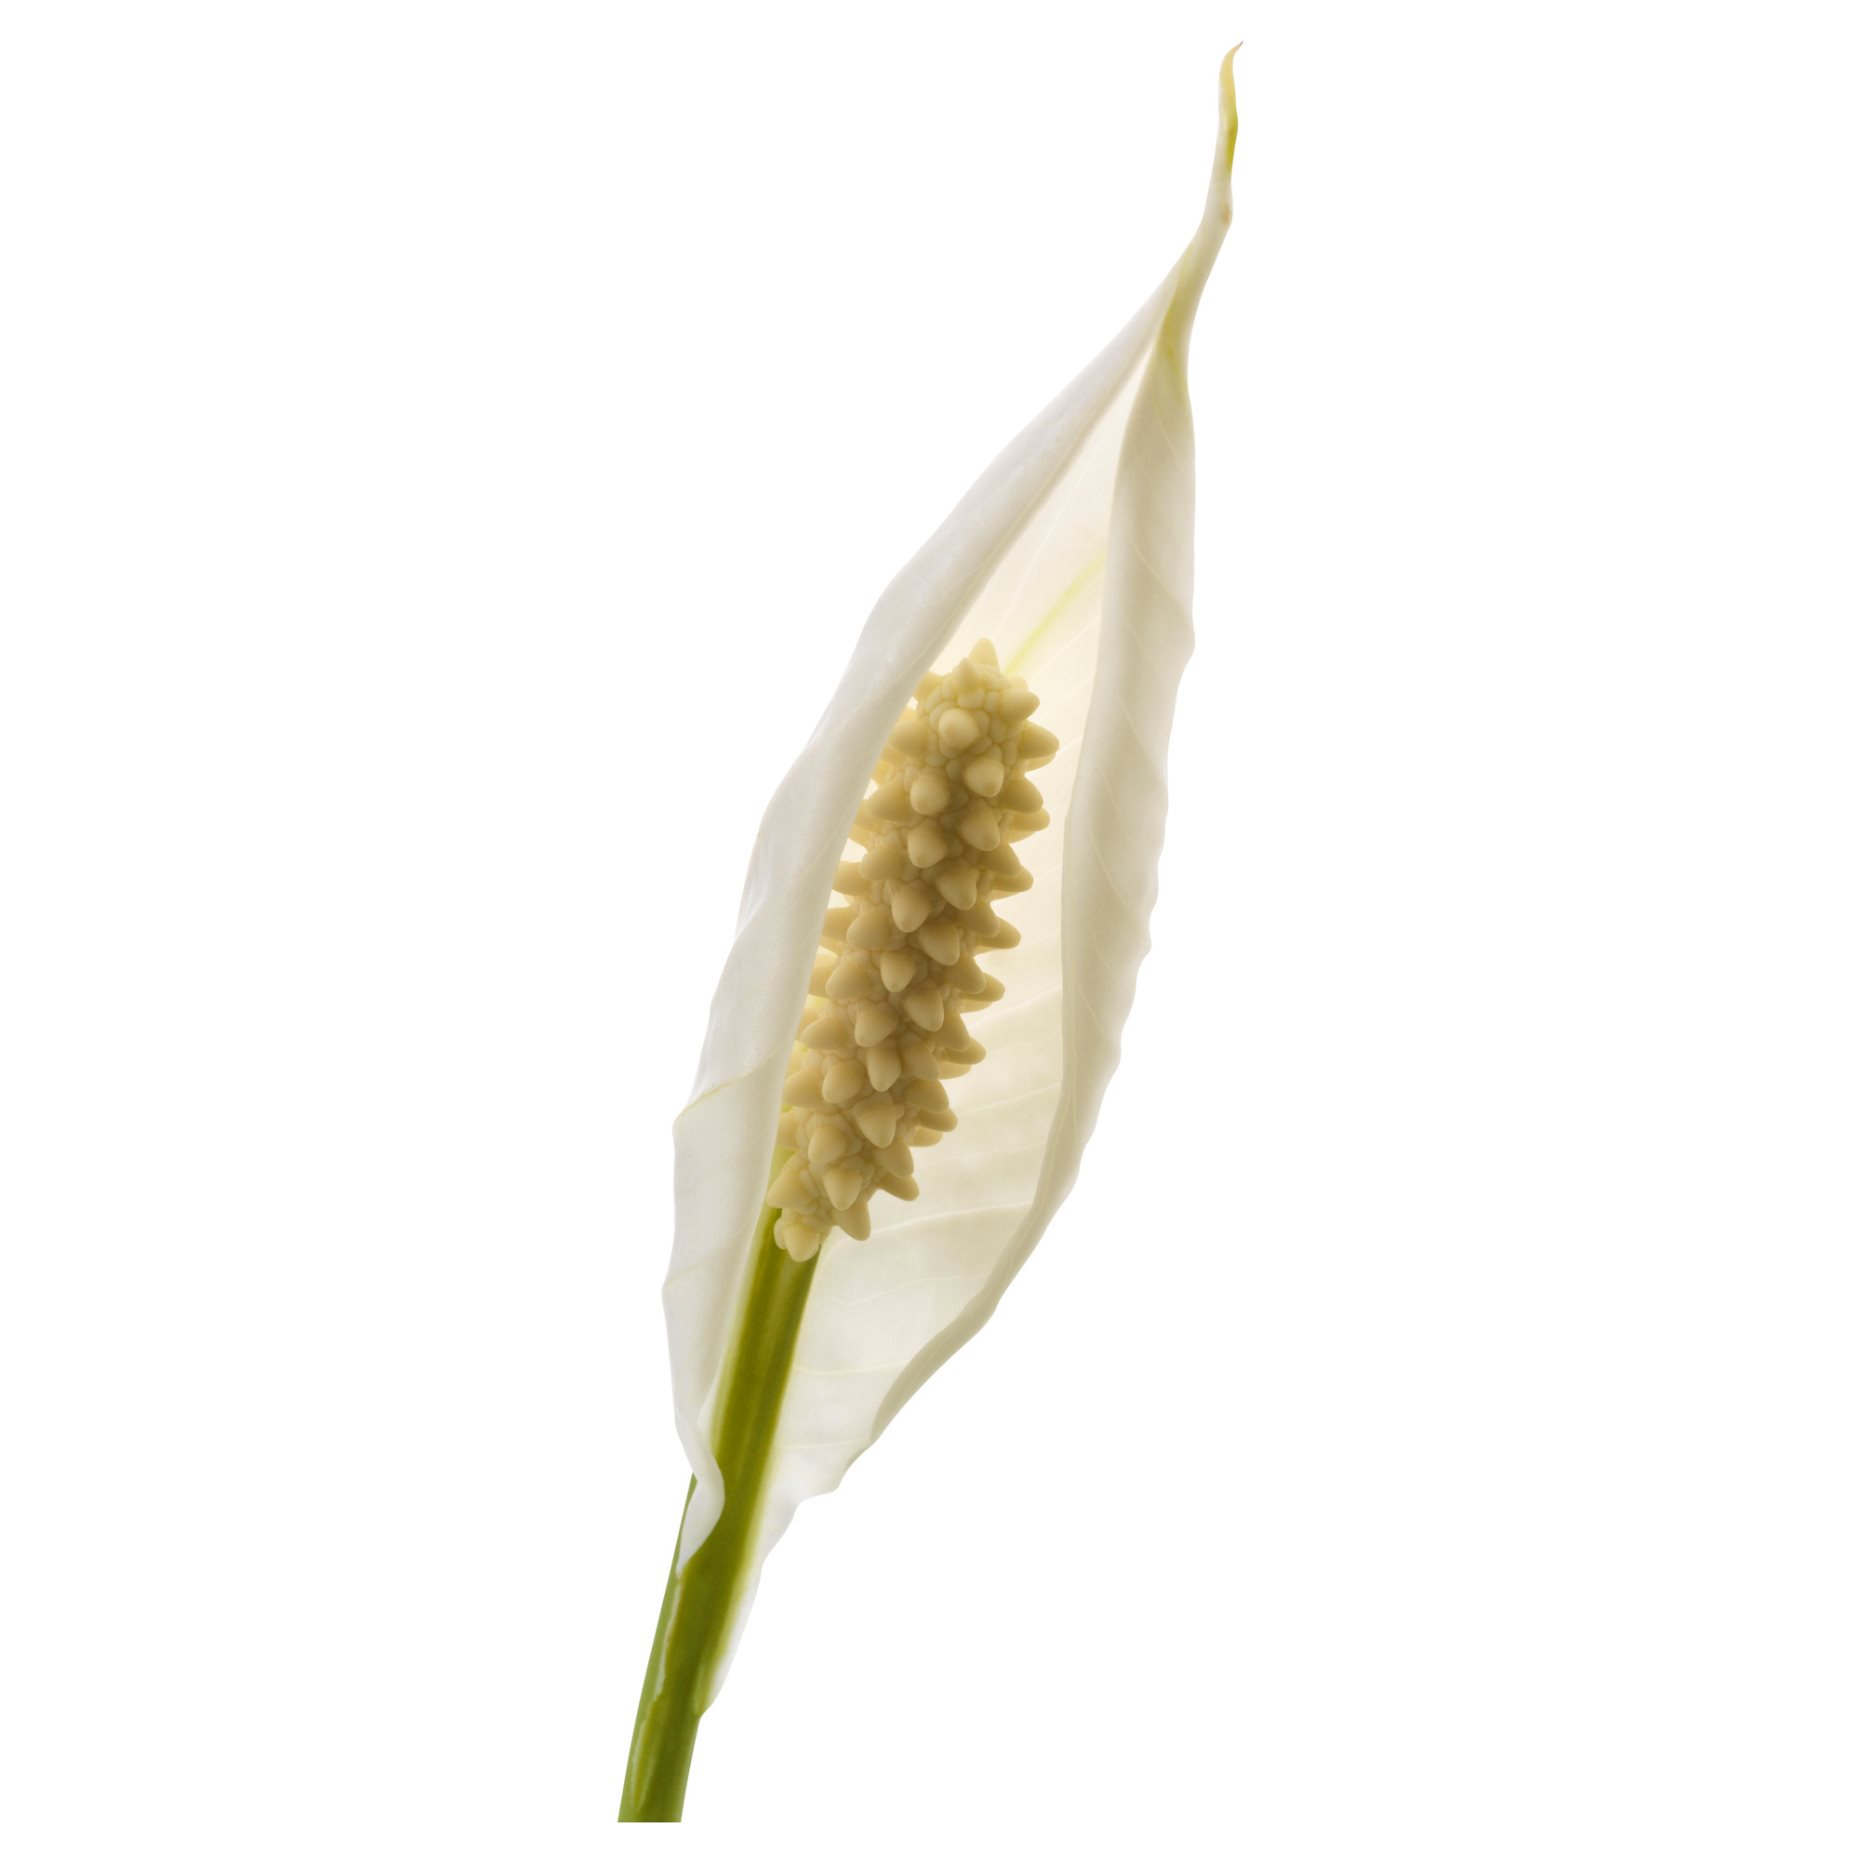 SPATHIPHYLLUM, potted plant, Peace lily, 601.449.01